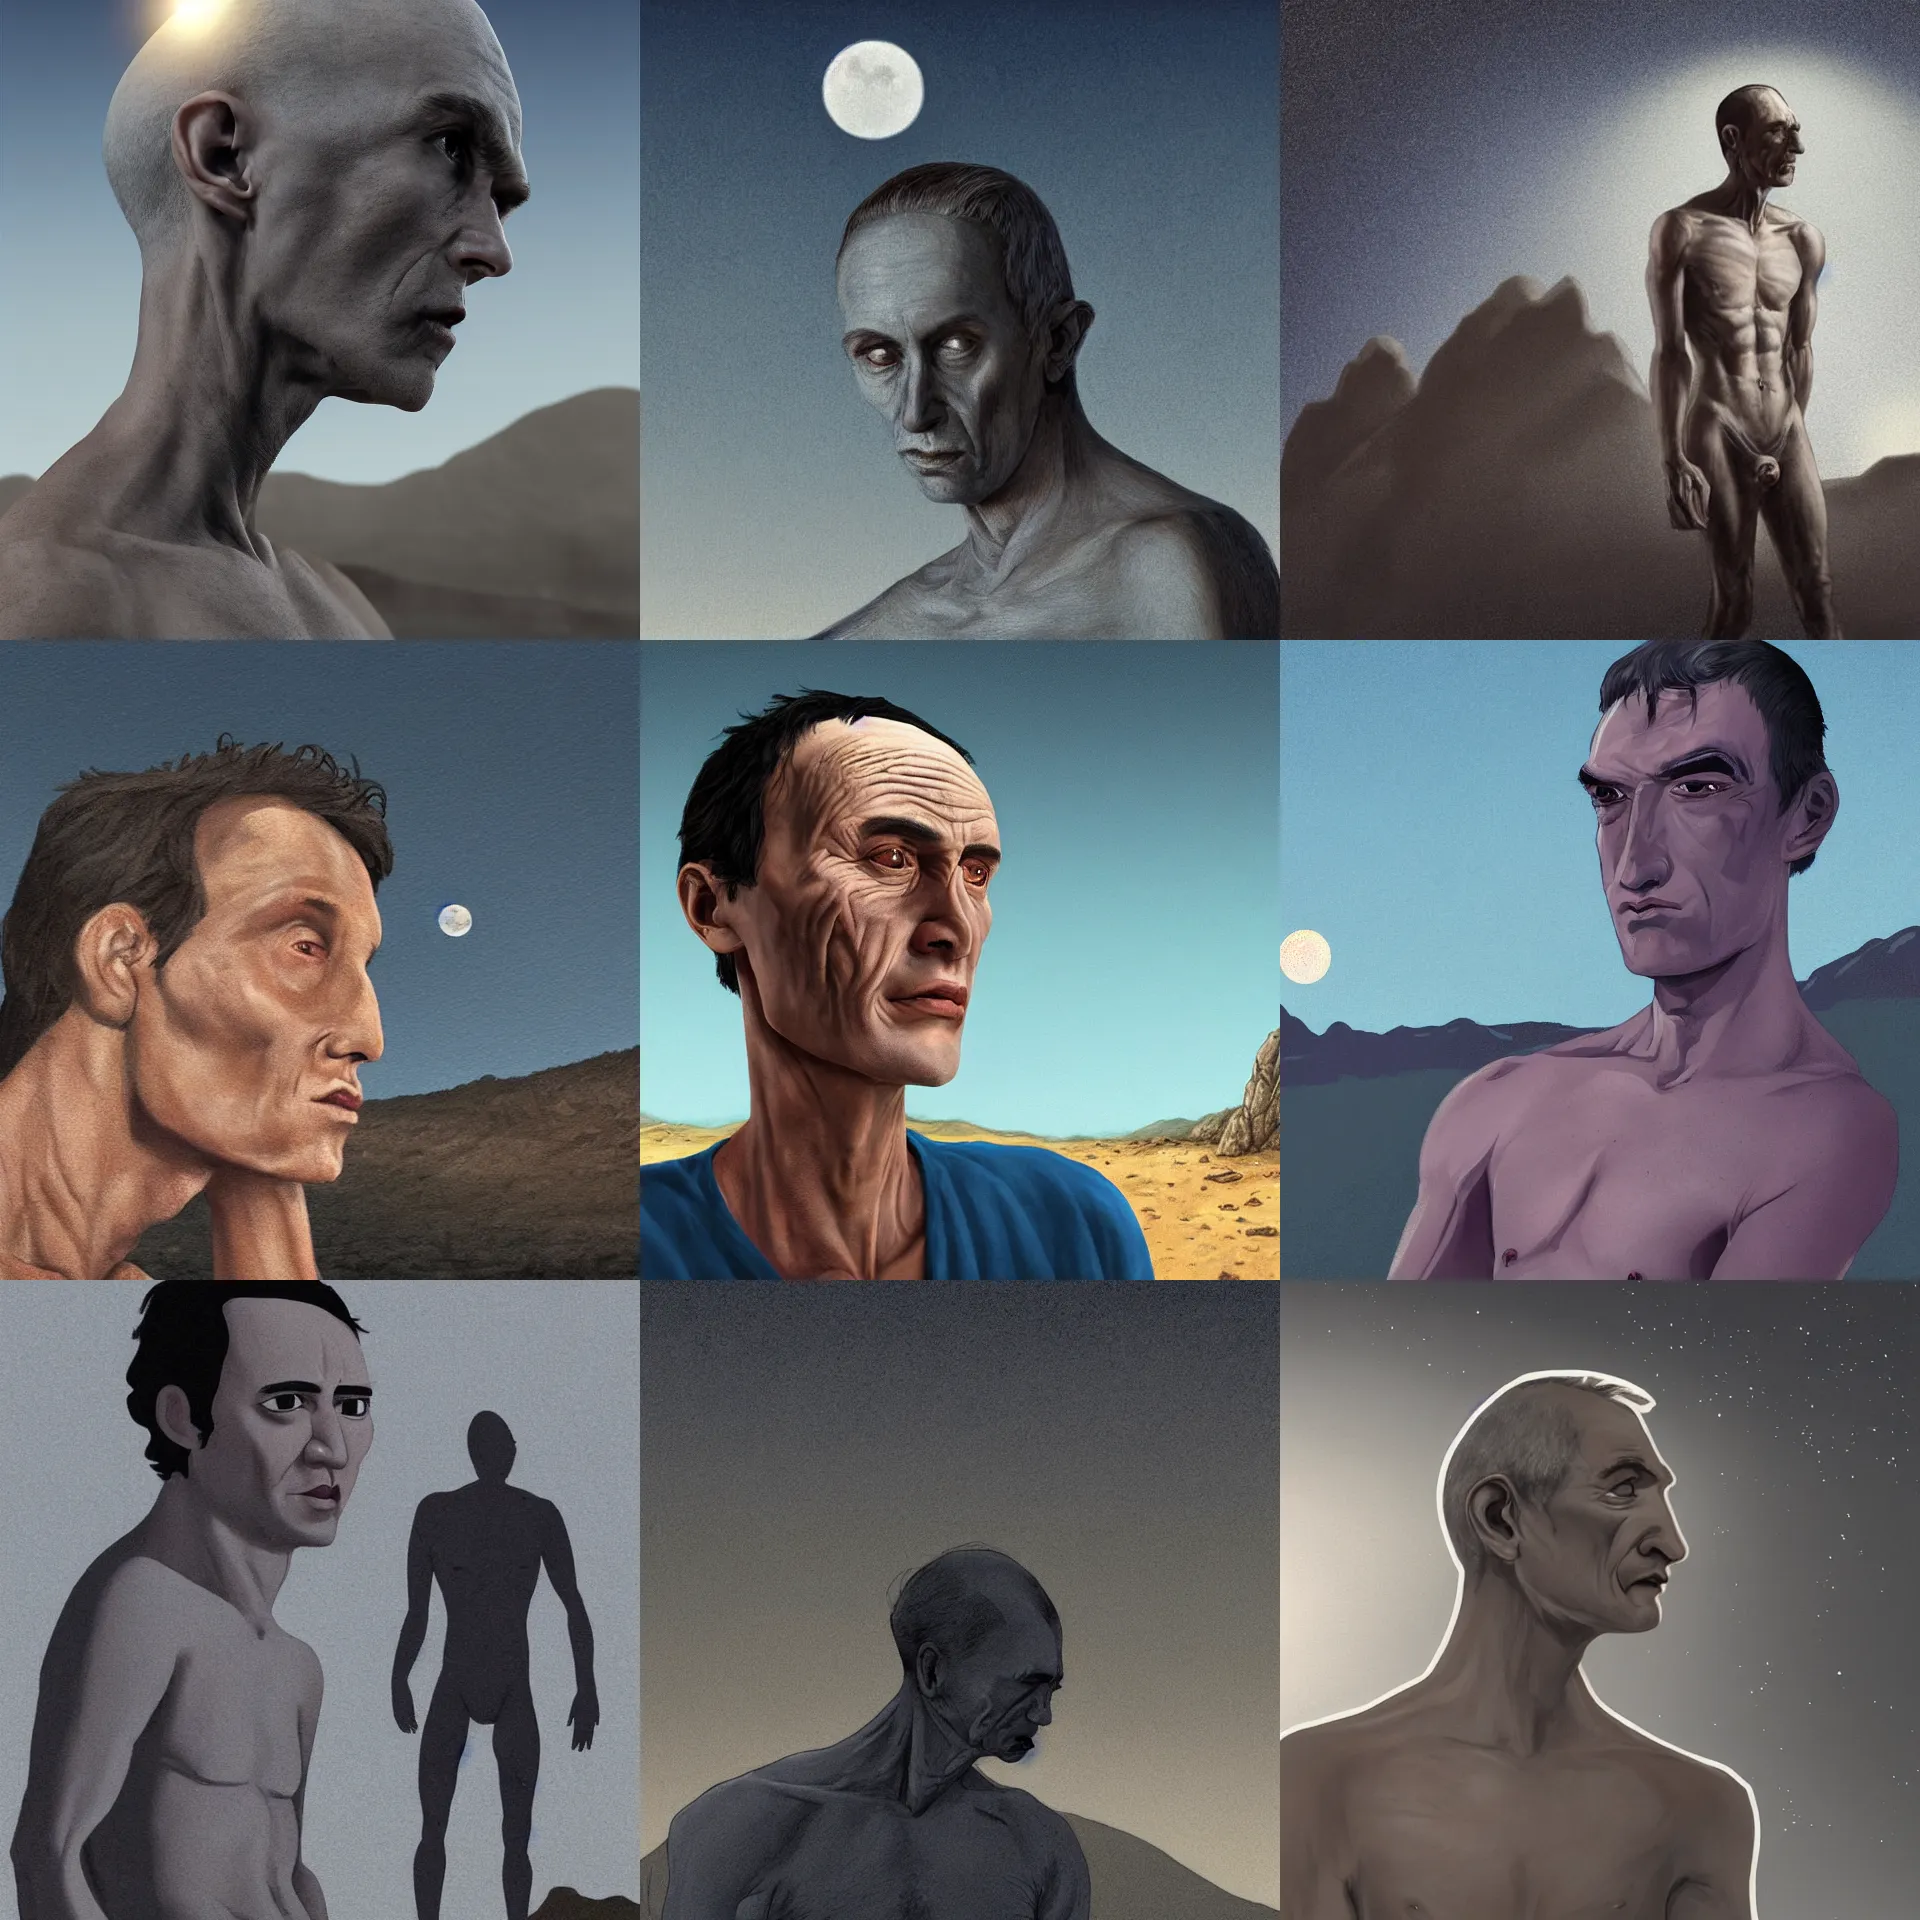 Prompt: Side view close up of a gaunt, skinny caucasian man, grey skin, with a large head and big eyes, a pronounced chin, a sad expression, shirtless, walking over a barren landscape at night. Hills and moon in the background. Dramatic lighting. Blue color palette. Digital art animated oil painting. Allan Poe style